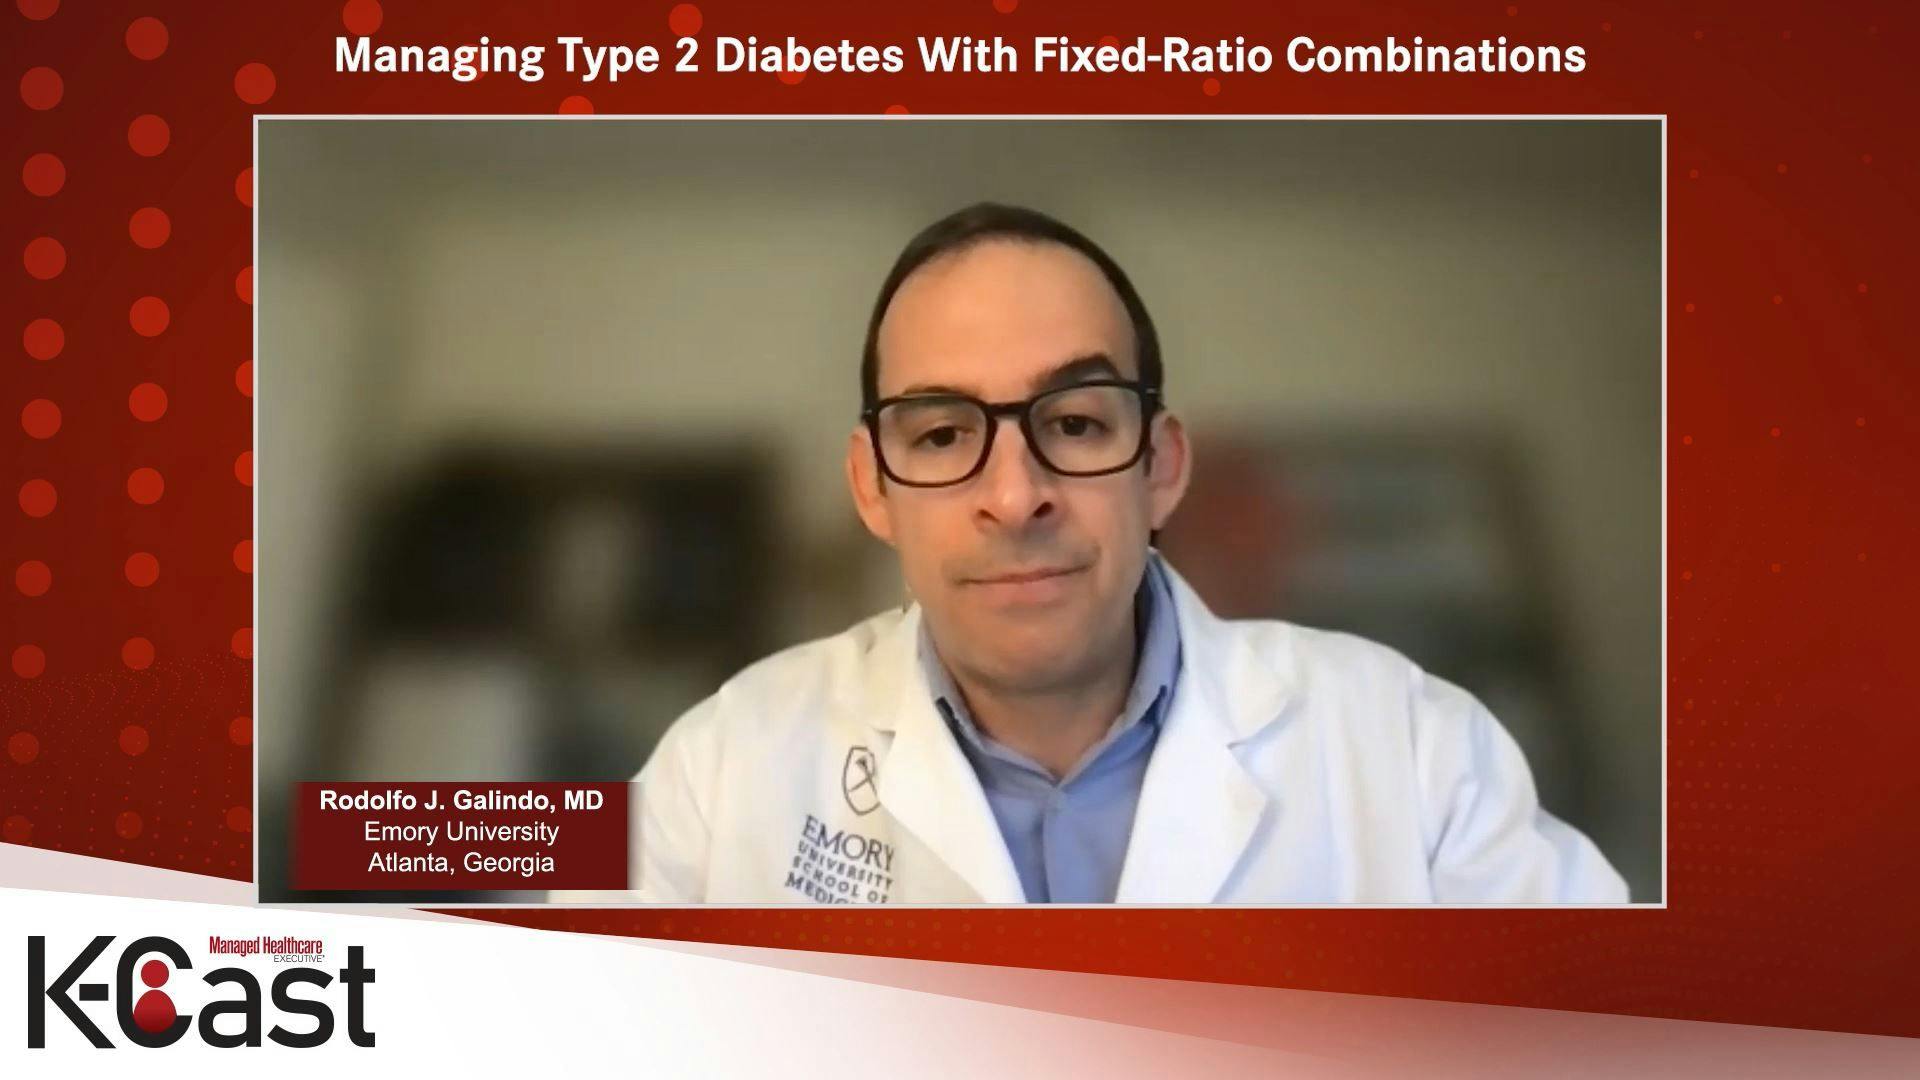 Managing Type 2 Diabetes With Fixed-Ratio Combinations